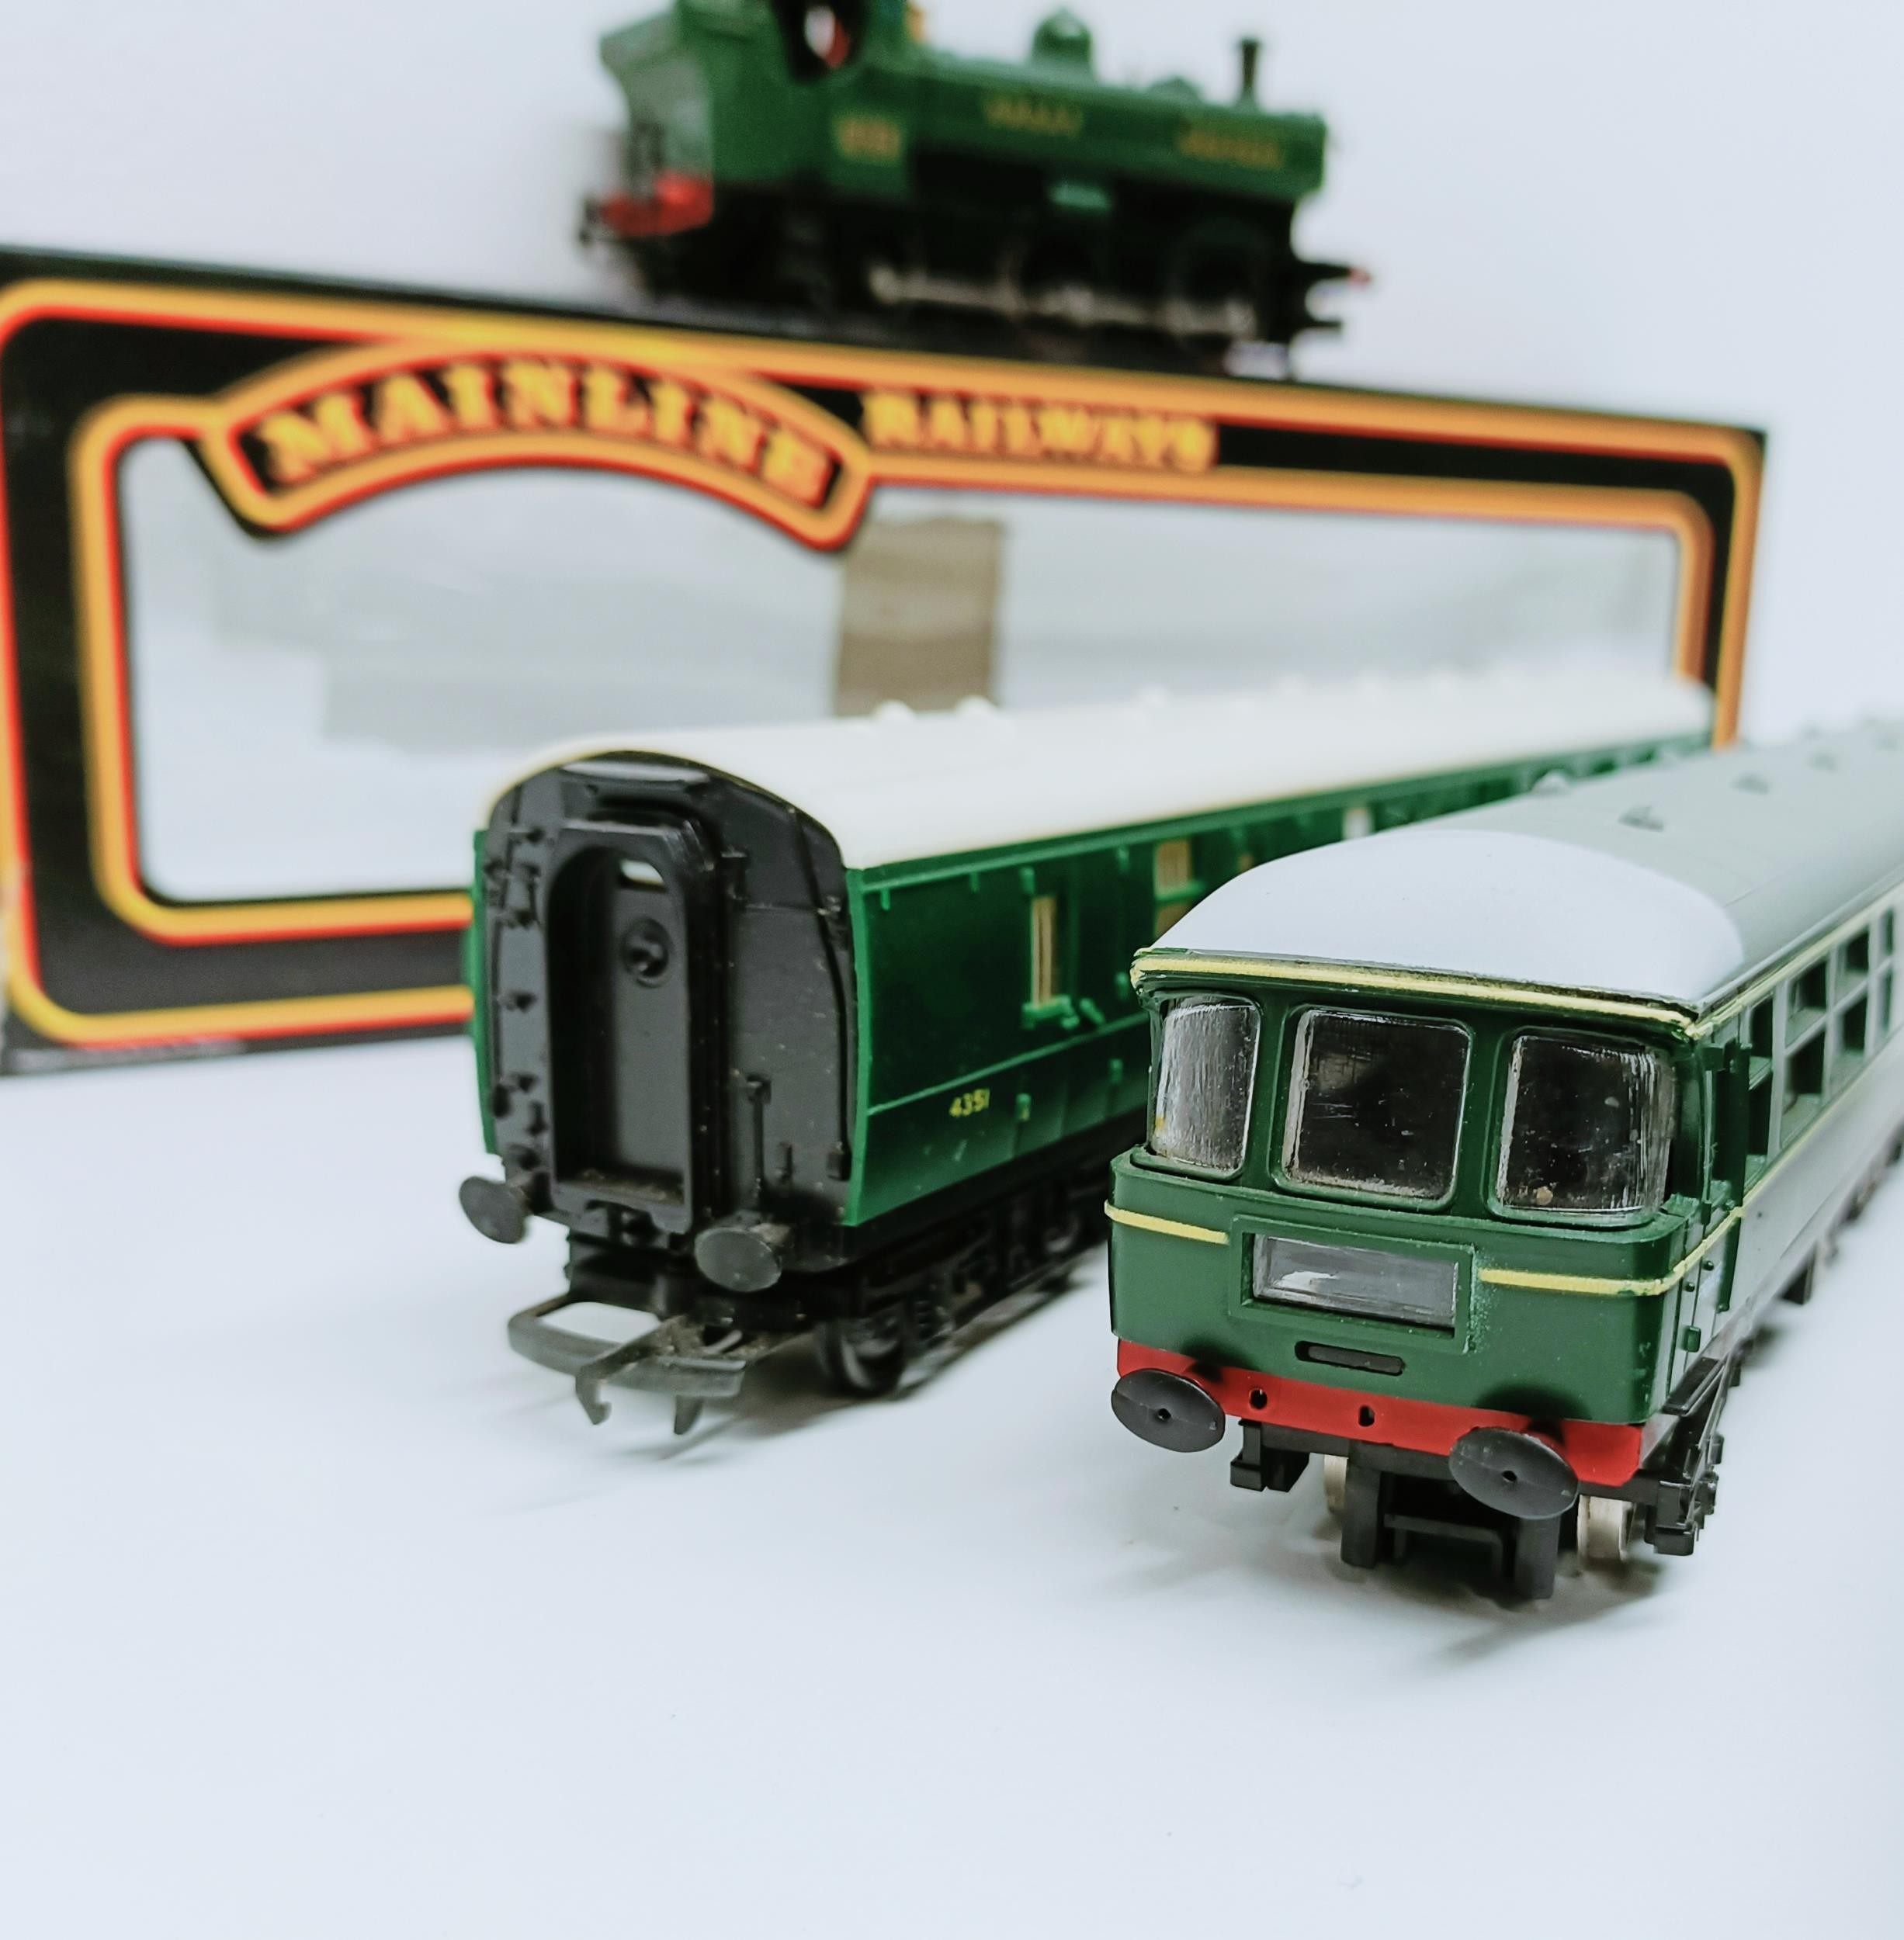 A Mainline Railways OO gauge 0-6-0 locomotive, lacking tender, No 37-058, boxed, a two car train - Image 4 of 10